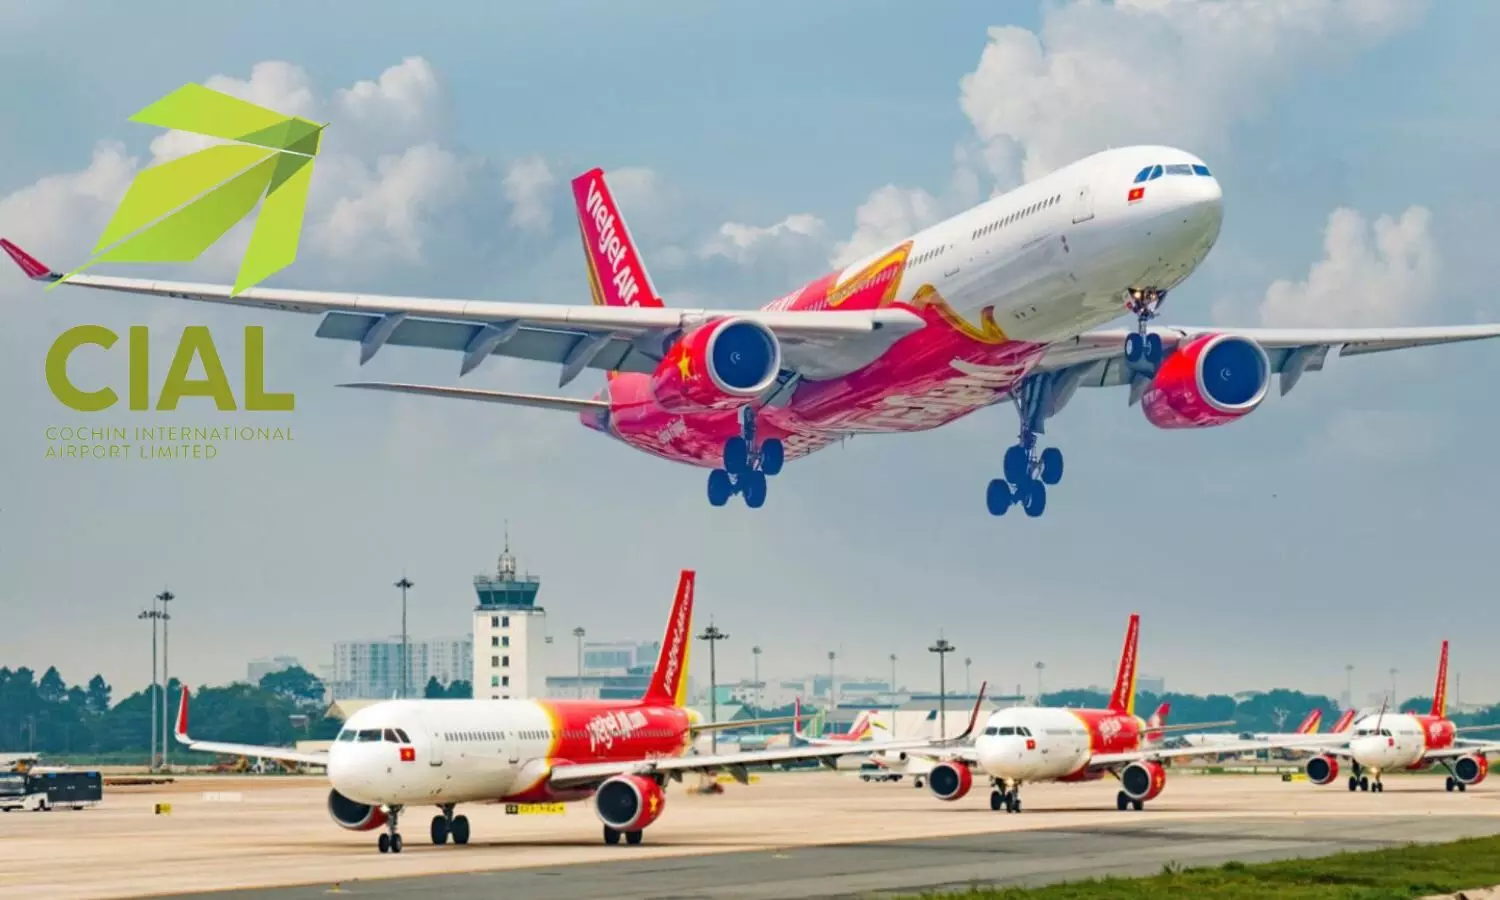 VietJet and CIAL